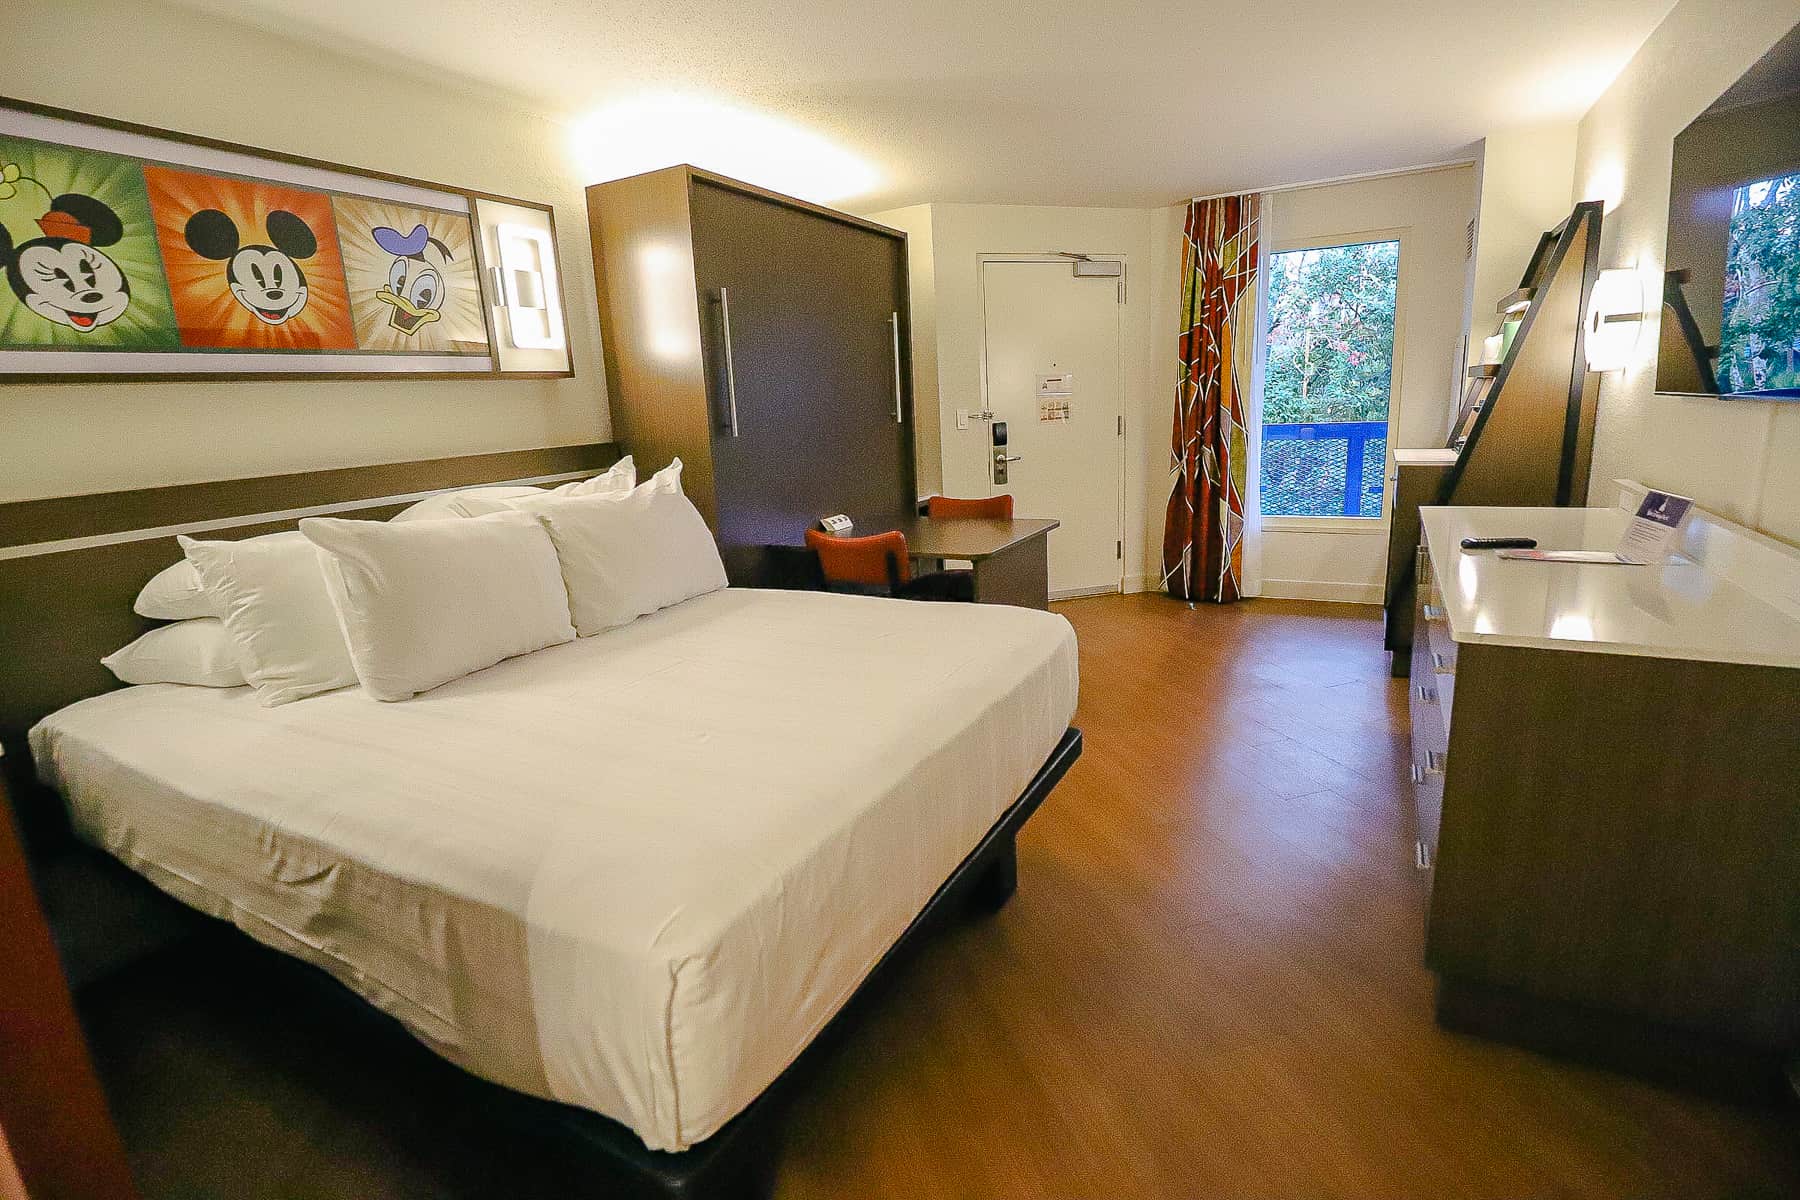 alternate view of guest room at Disney's All-Star Sports Resort 